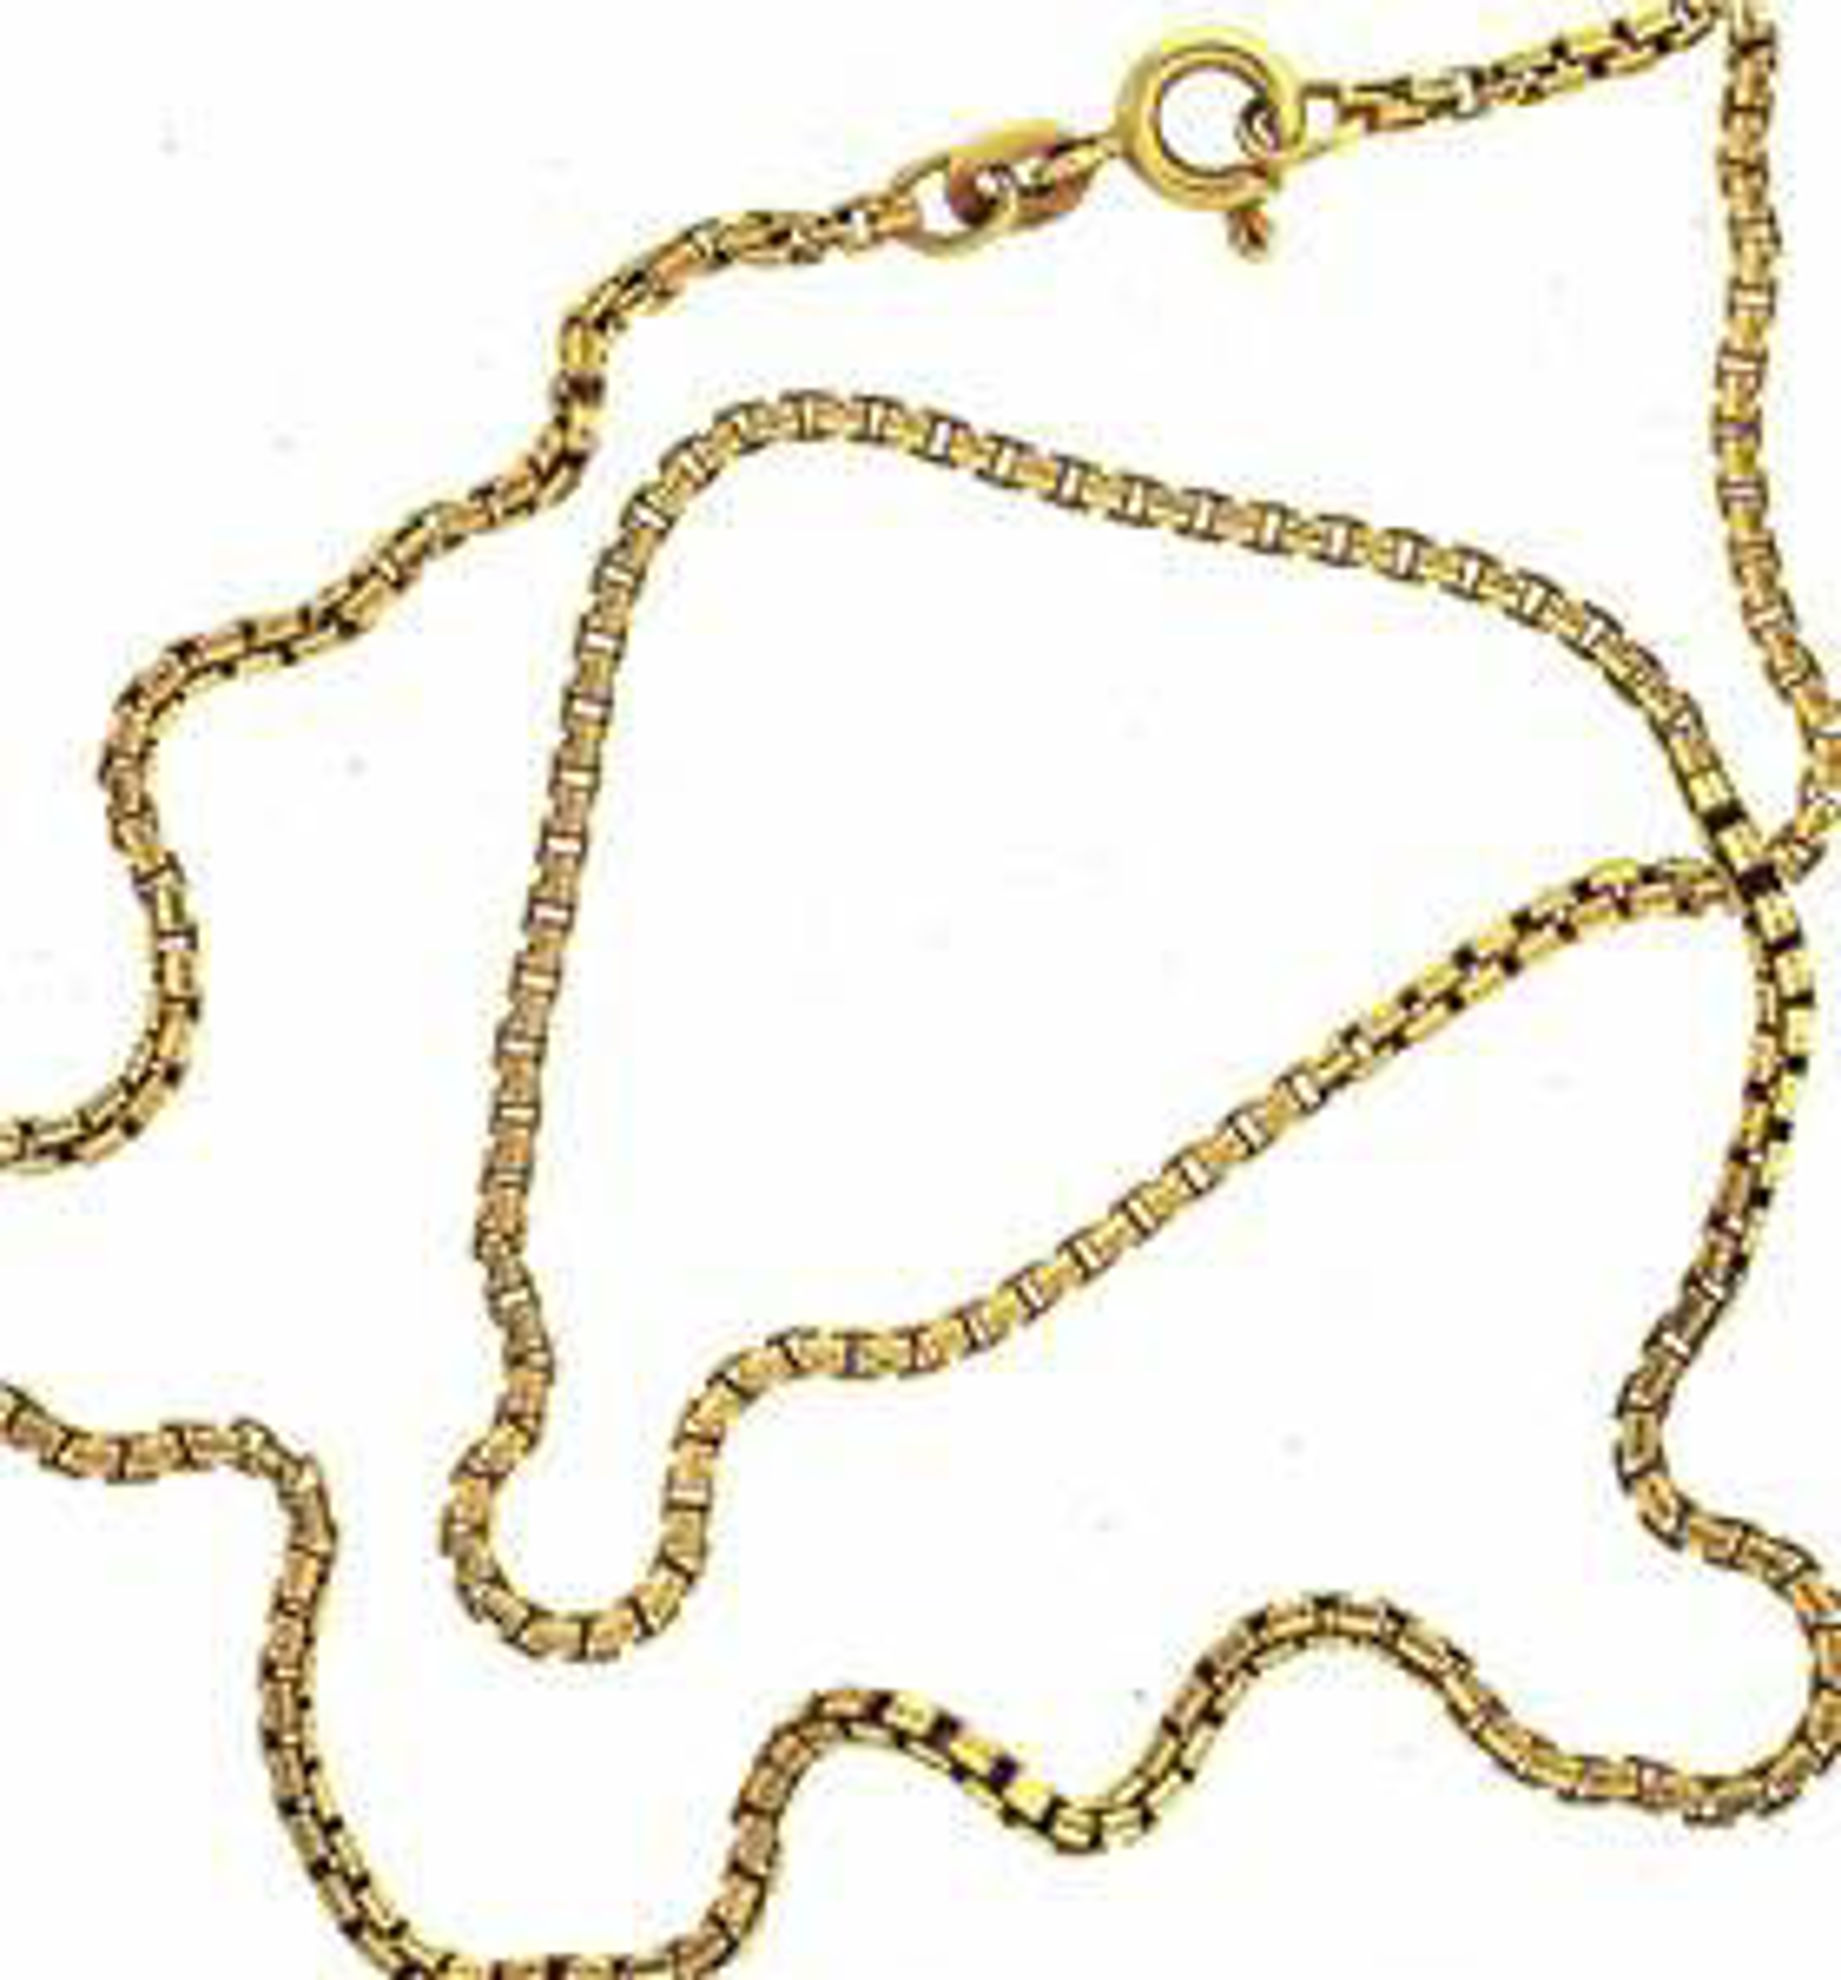 Picture of Chains 14kt-2.9 DWT, 4.5 Grams